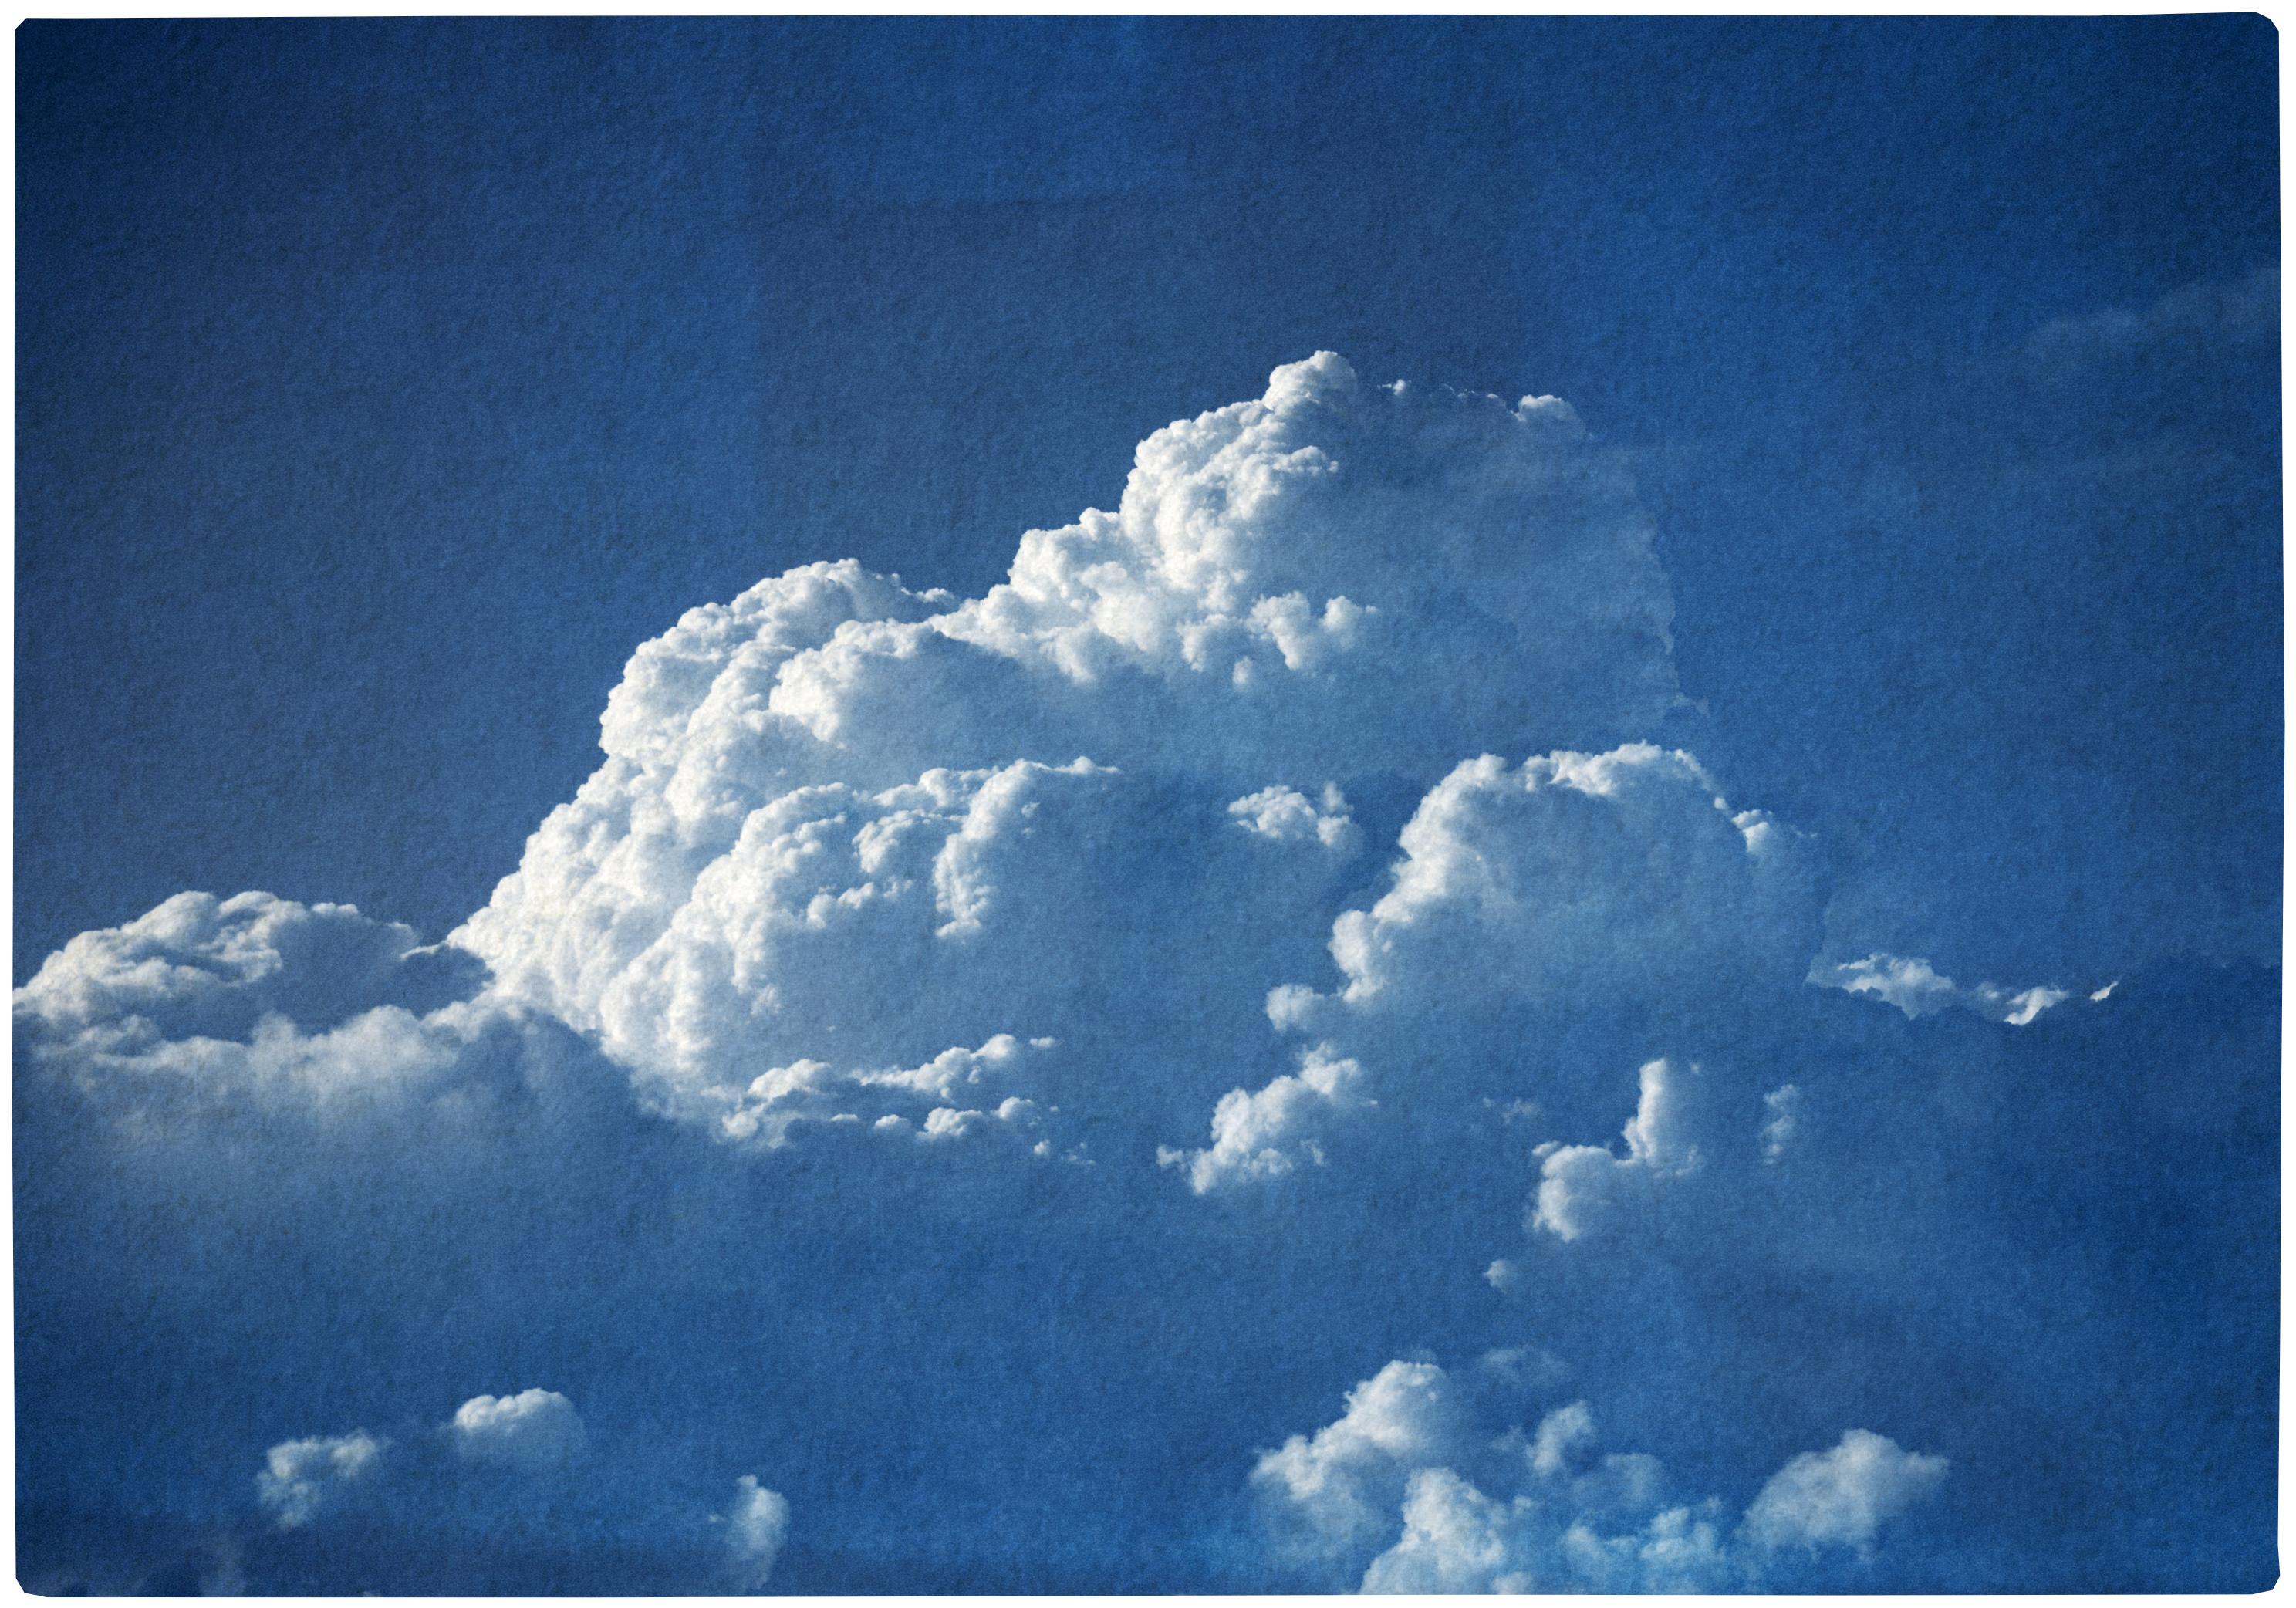 Majestic Cloudy Sky, Handmade Cyanotype Print on Watercolor Paper, Blue Nature 